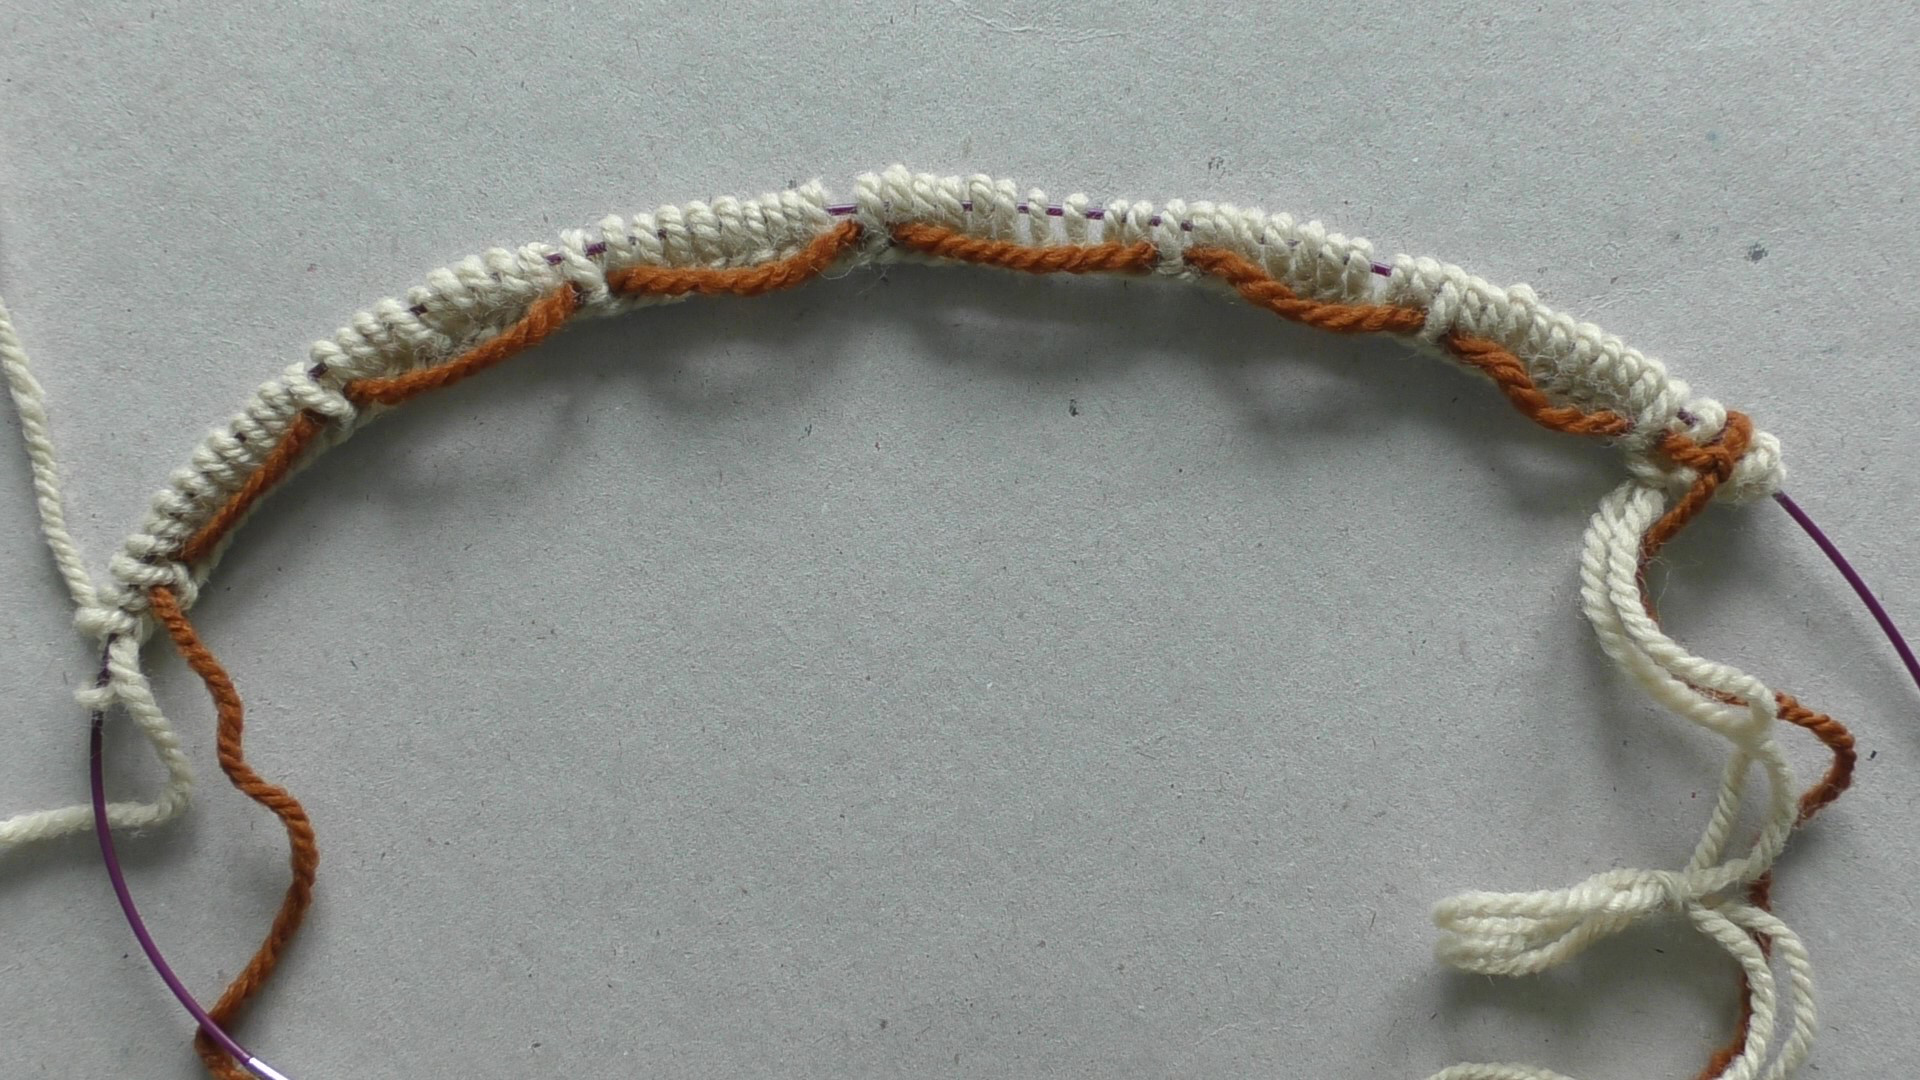 Cast-on edge showing groups of stitches marked with marker stitches.